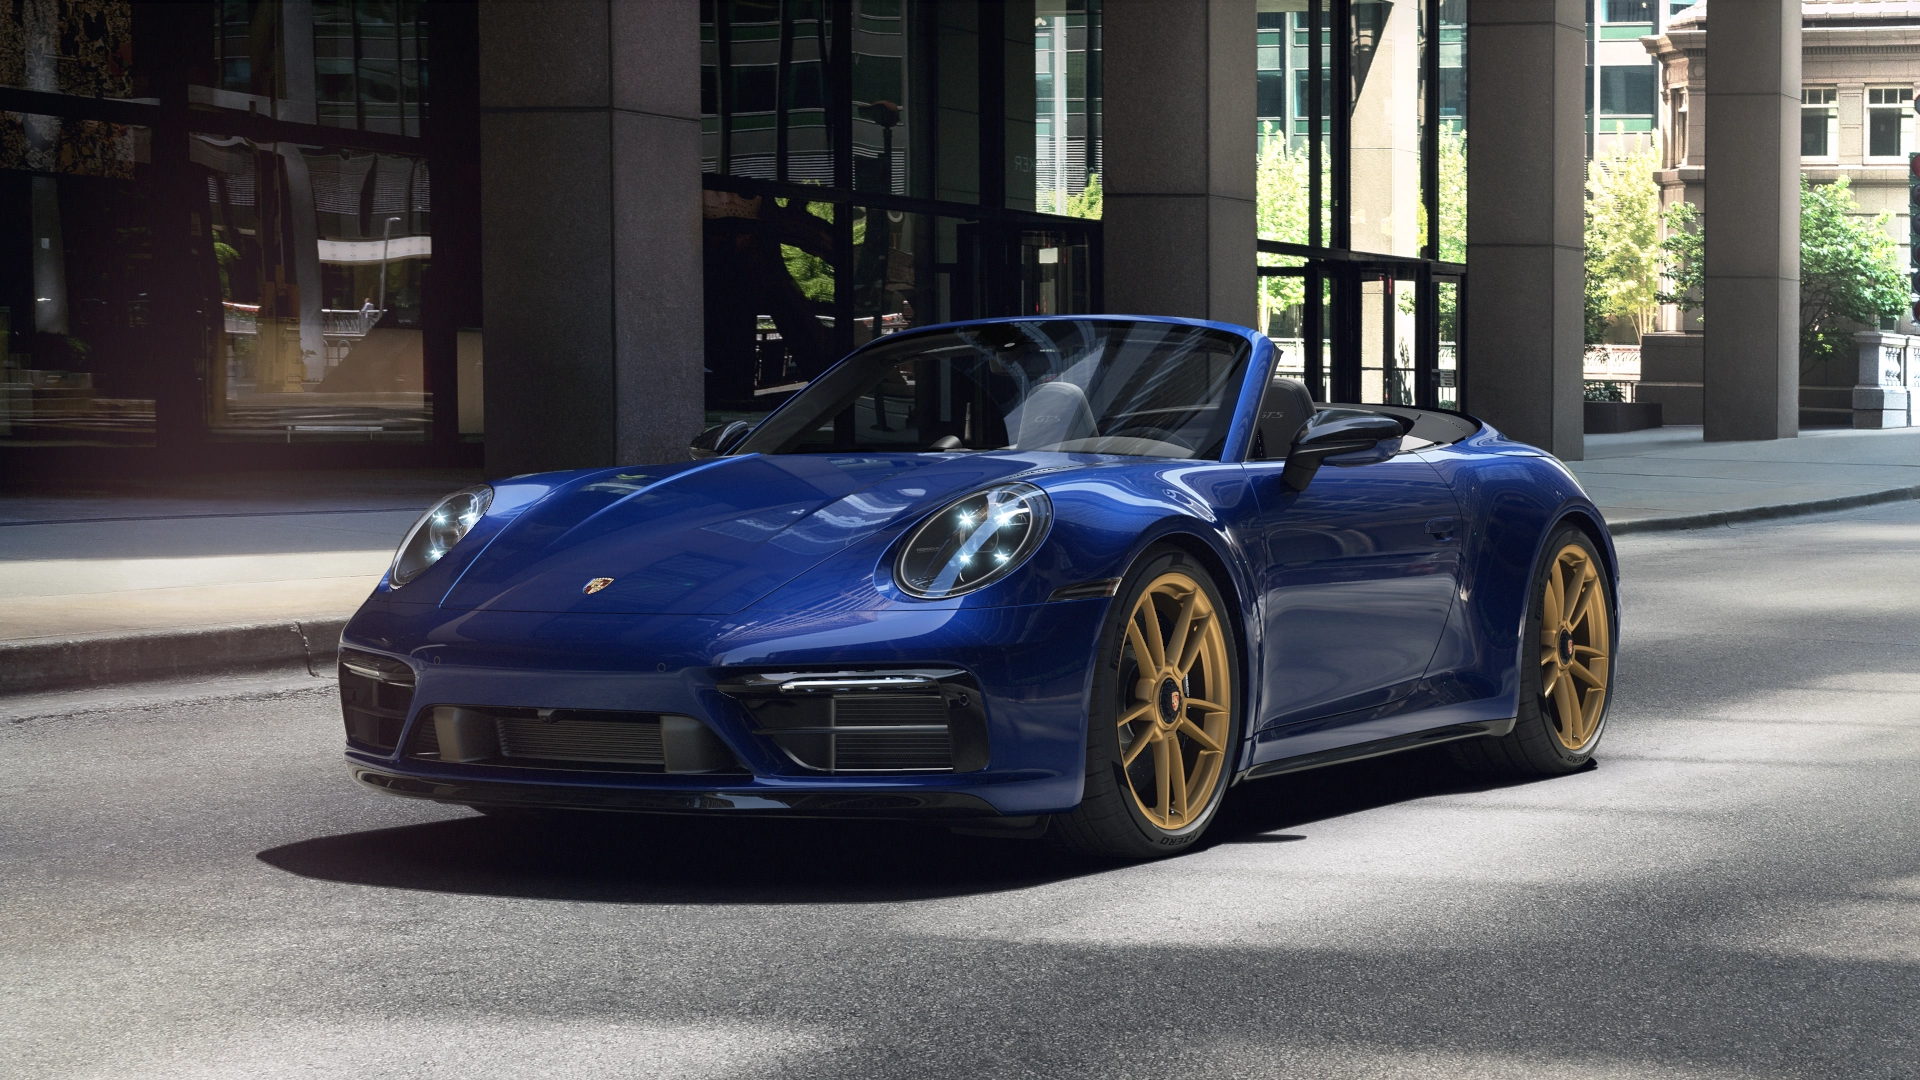 911 Carrera GTS Cabriolet front view